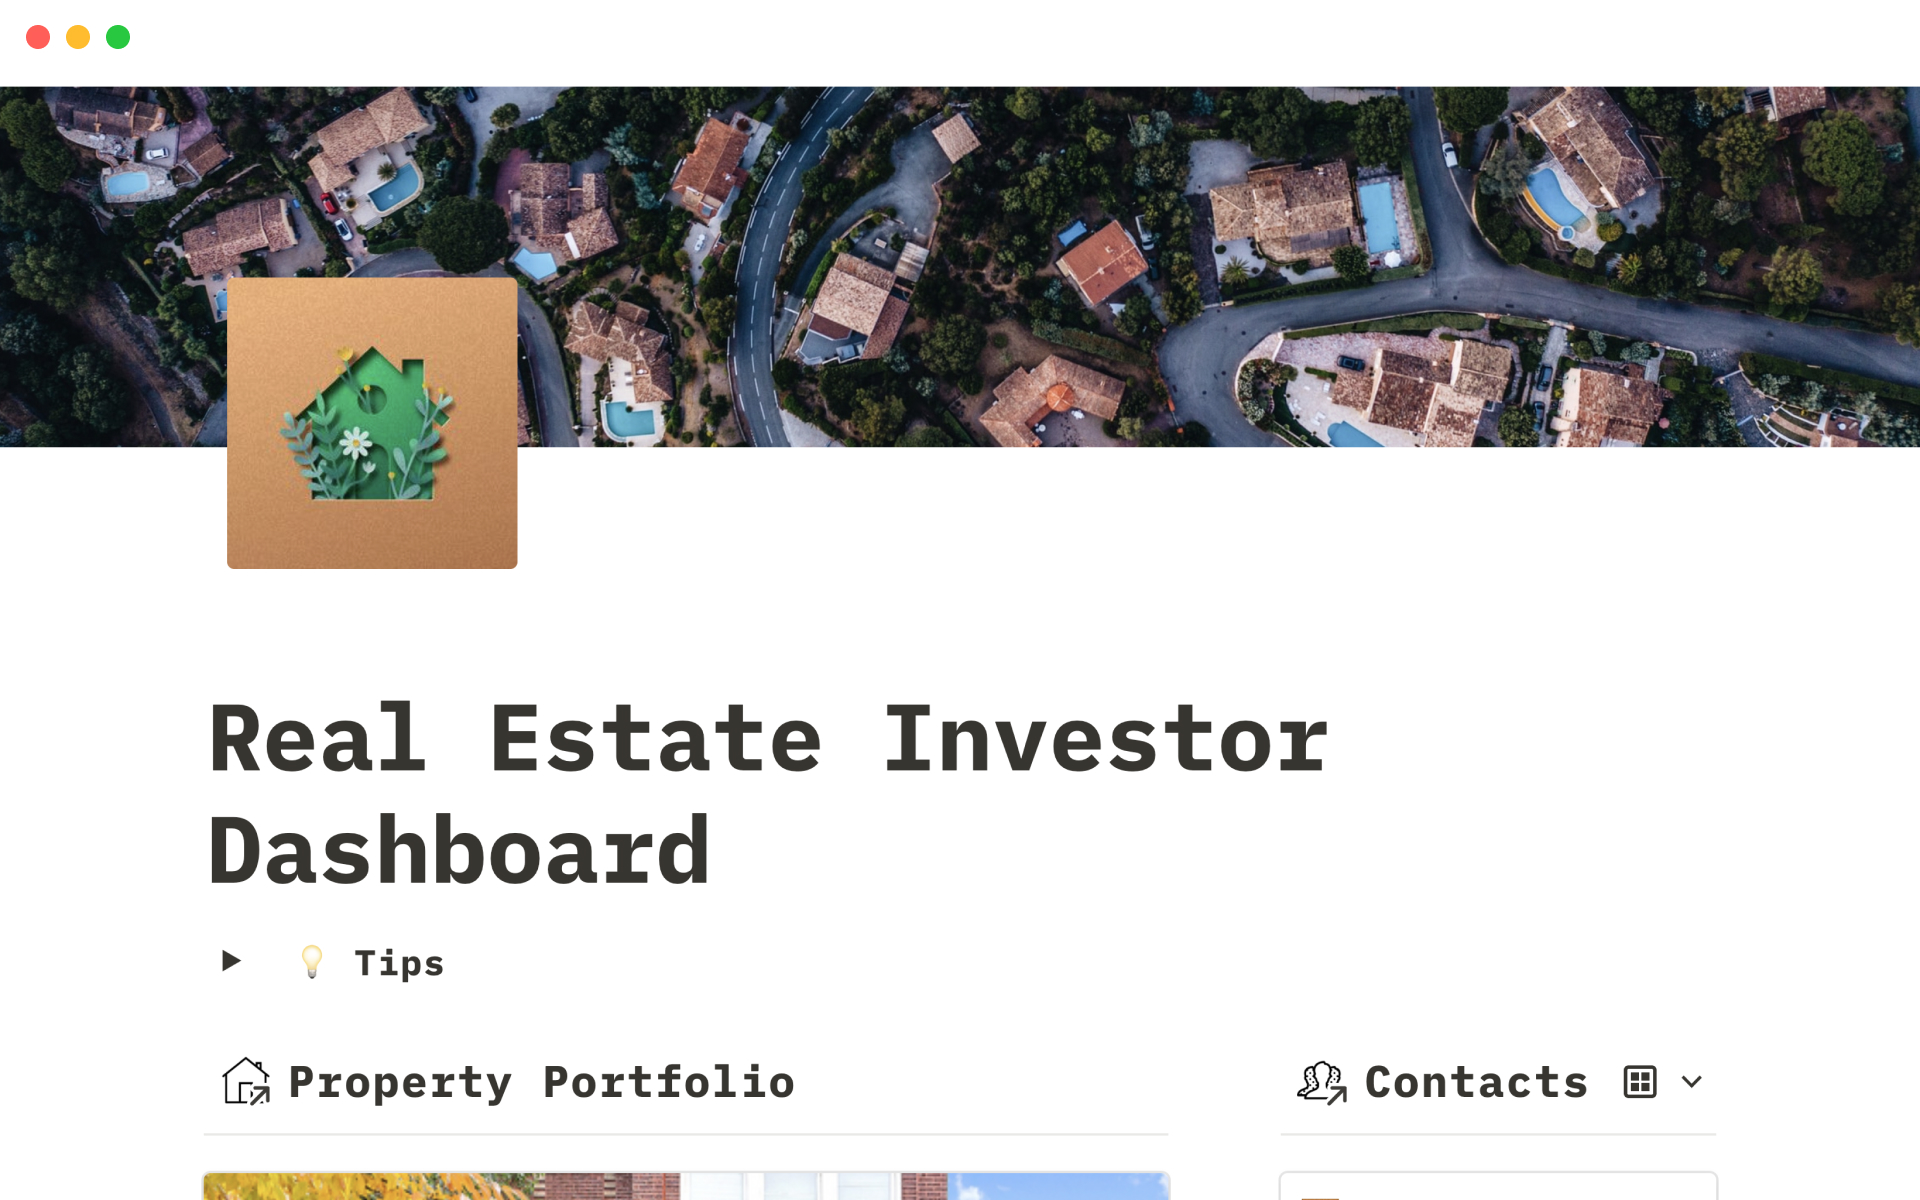 Helps real estate investors and property owners manage their entire portfolio, finances, leases, tenants, contractors and much more.